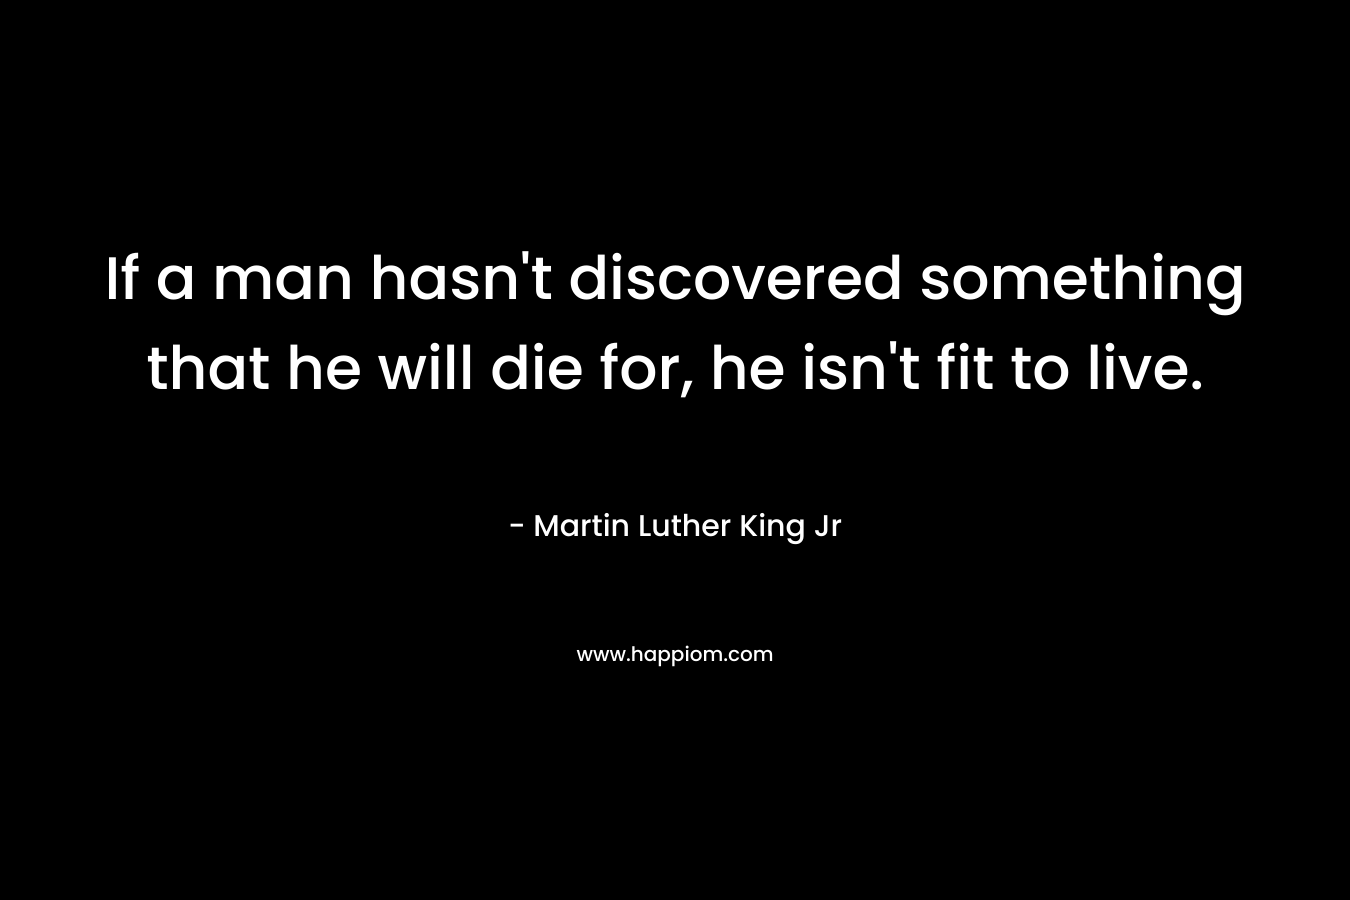 If a man hasn't discovered something that he will die for, he isn't fit to live.